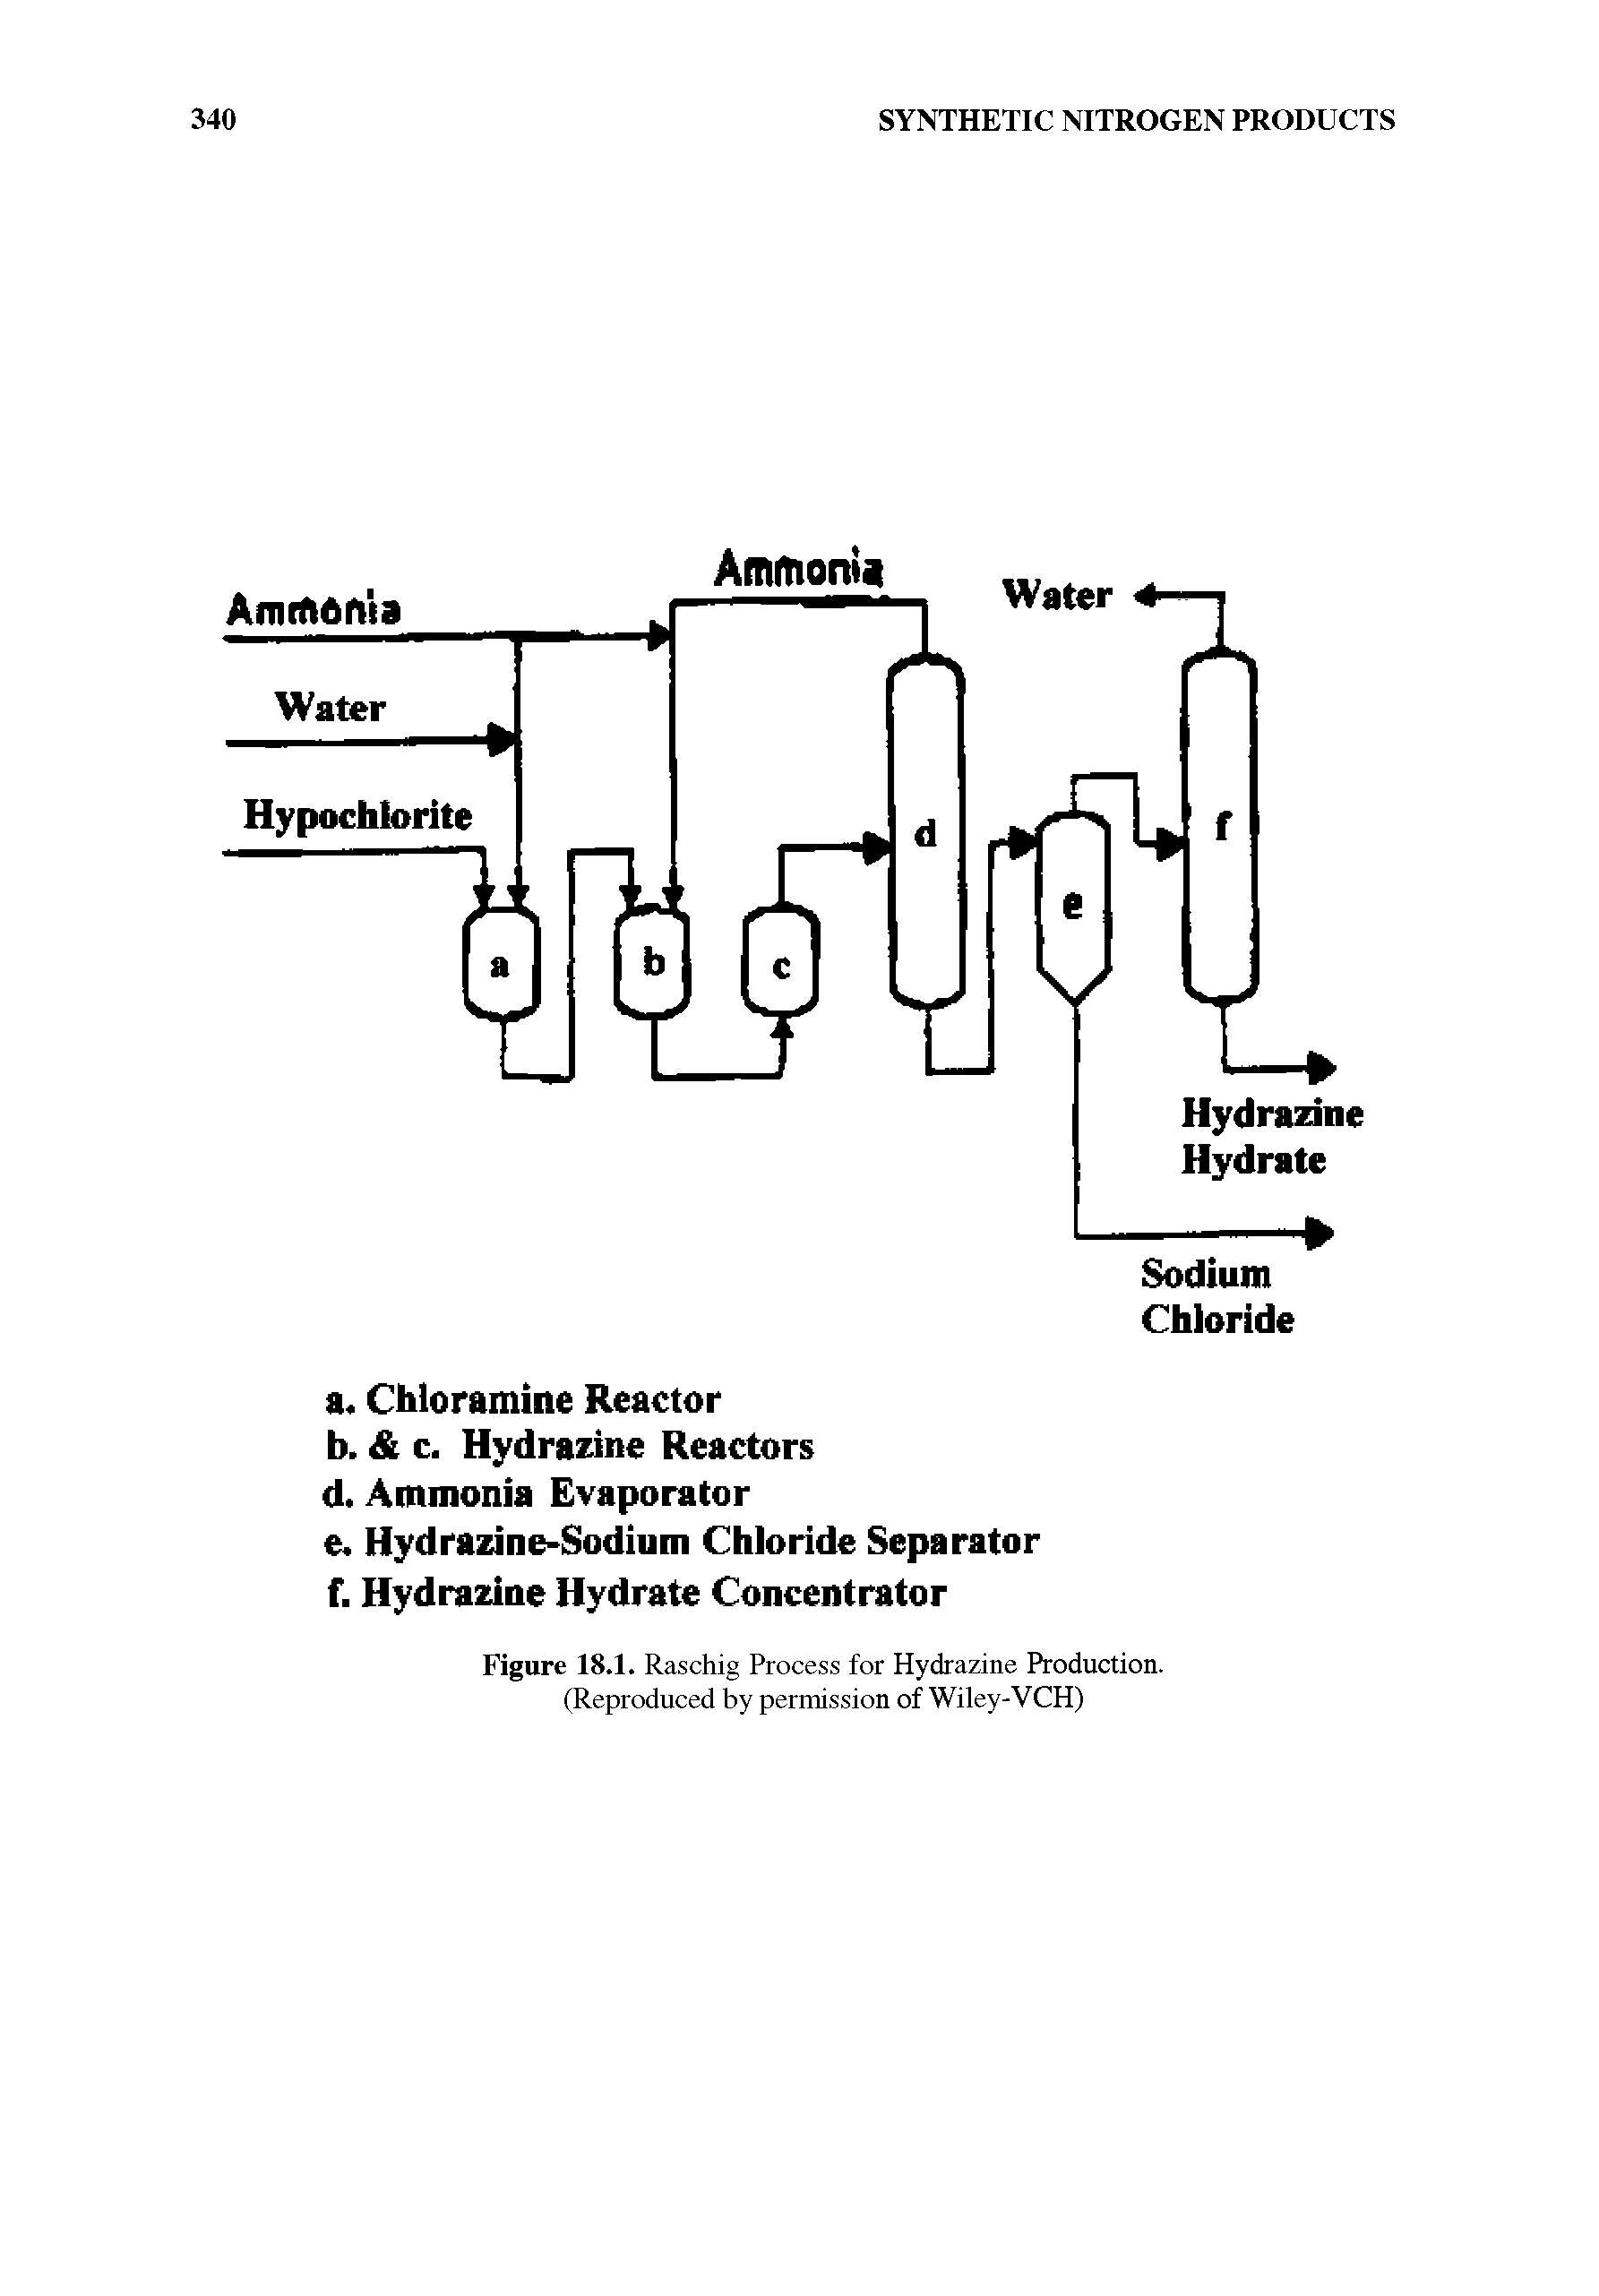 Figure 18.1. Raschig Process for Hydrazine Production. (Reproduced by permission of Wiley-VCH)...